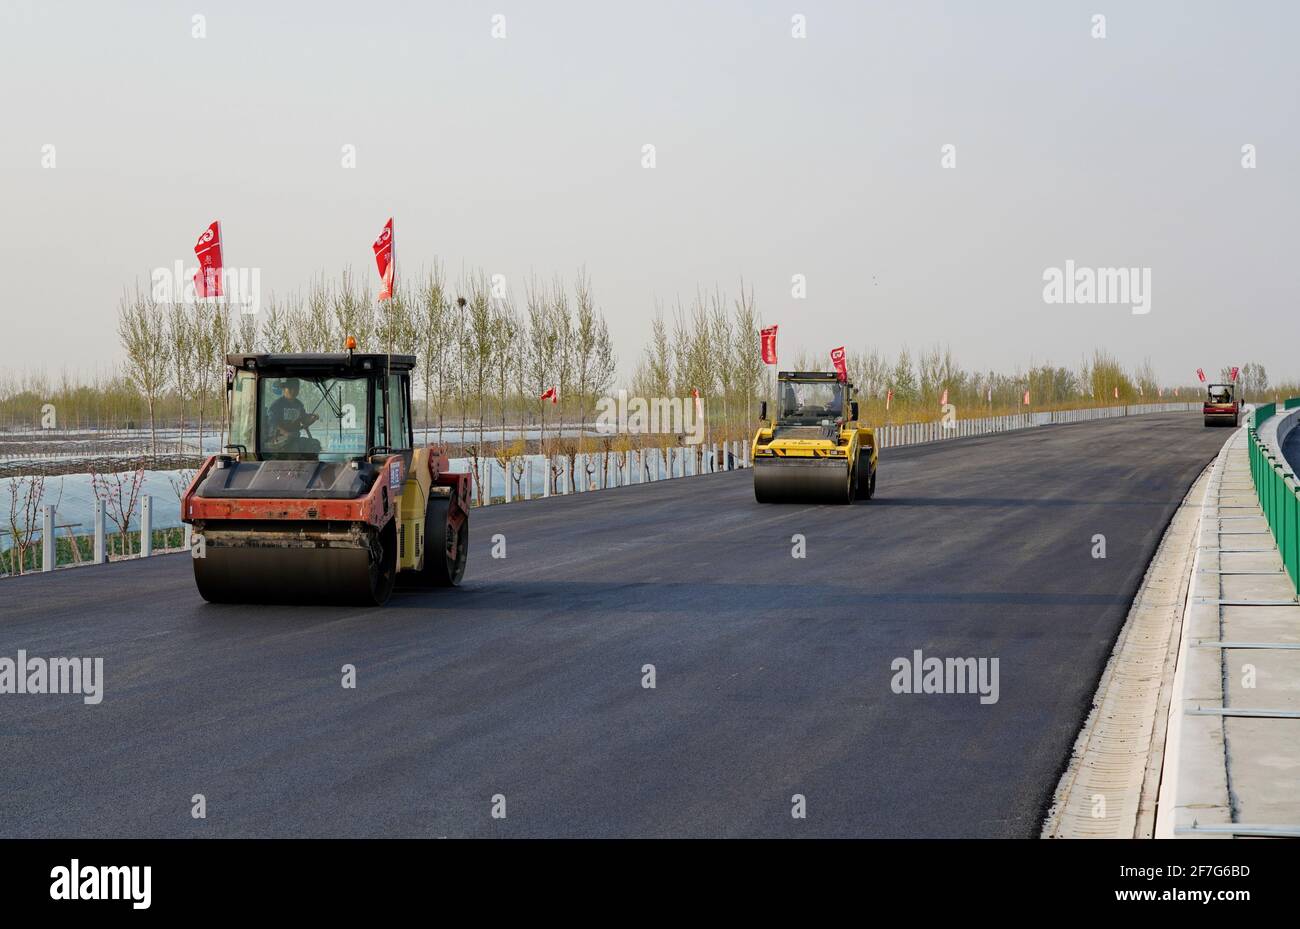 Shijiazhuang. 7th Apr, 2020. Photo taken on April 7, 2020 shows people working at the construction site of the Beijing-Dezhou expressway in north China's Hebei Province. The first phase of the expressway linking Beijing Daxing International Airport and Dezhou City in Hebei is expected to be put into operation in May 2021. Credit: Mu Yu/Xinhua/Alamy Live News Stock Photo